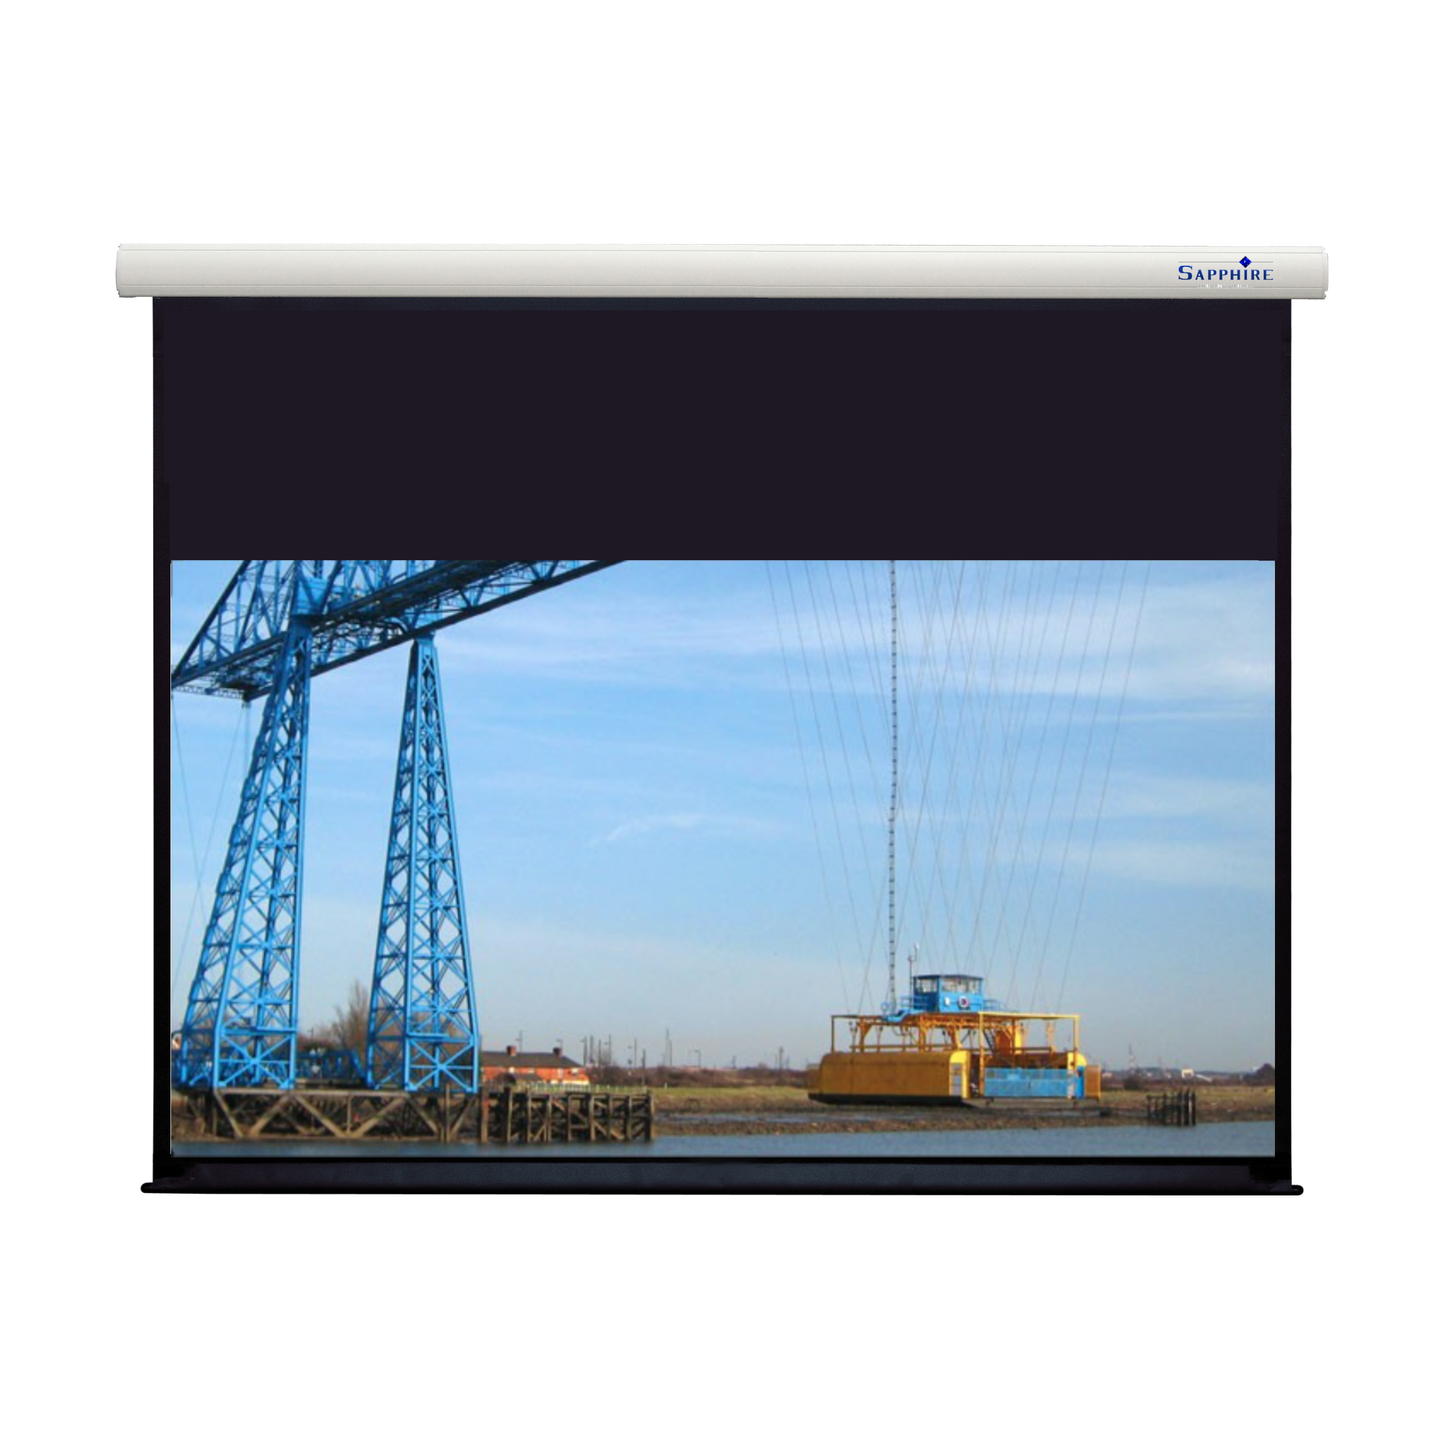 Sapphire Electric Radio Frequency Screen 16:10 Format Viewing Area 3010 x 1881mm Approx Case Dimensions L 3330mm x H 126mm x D 120mm